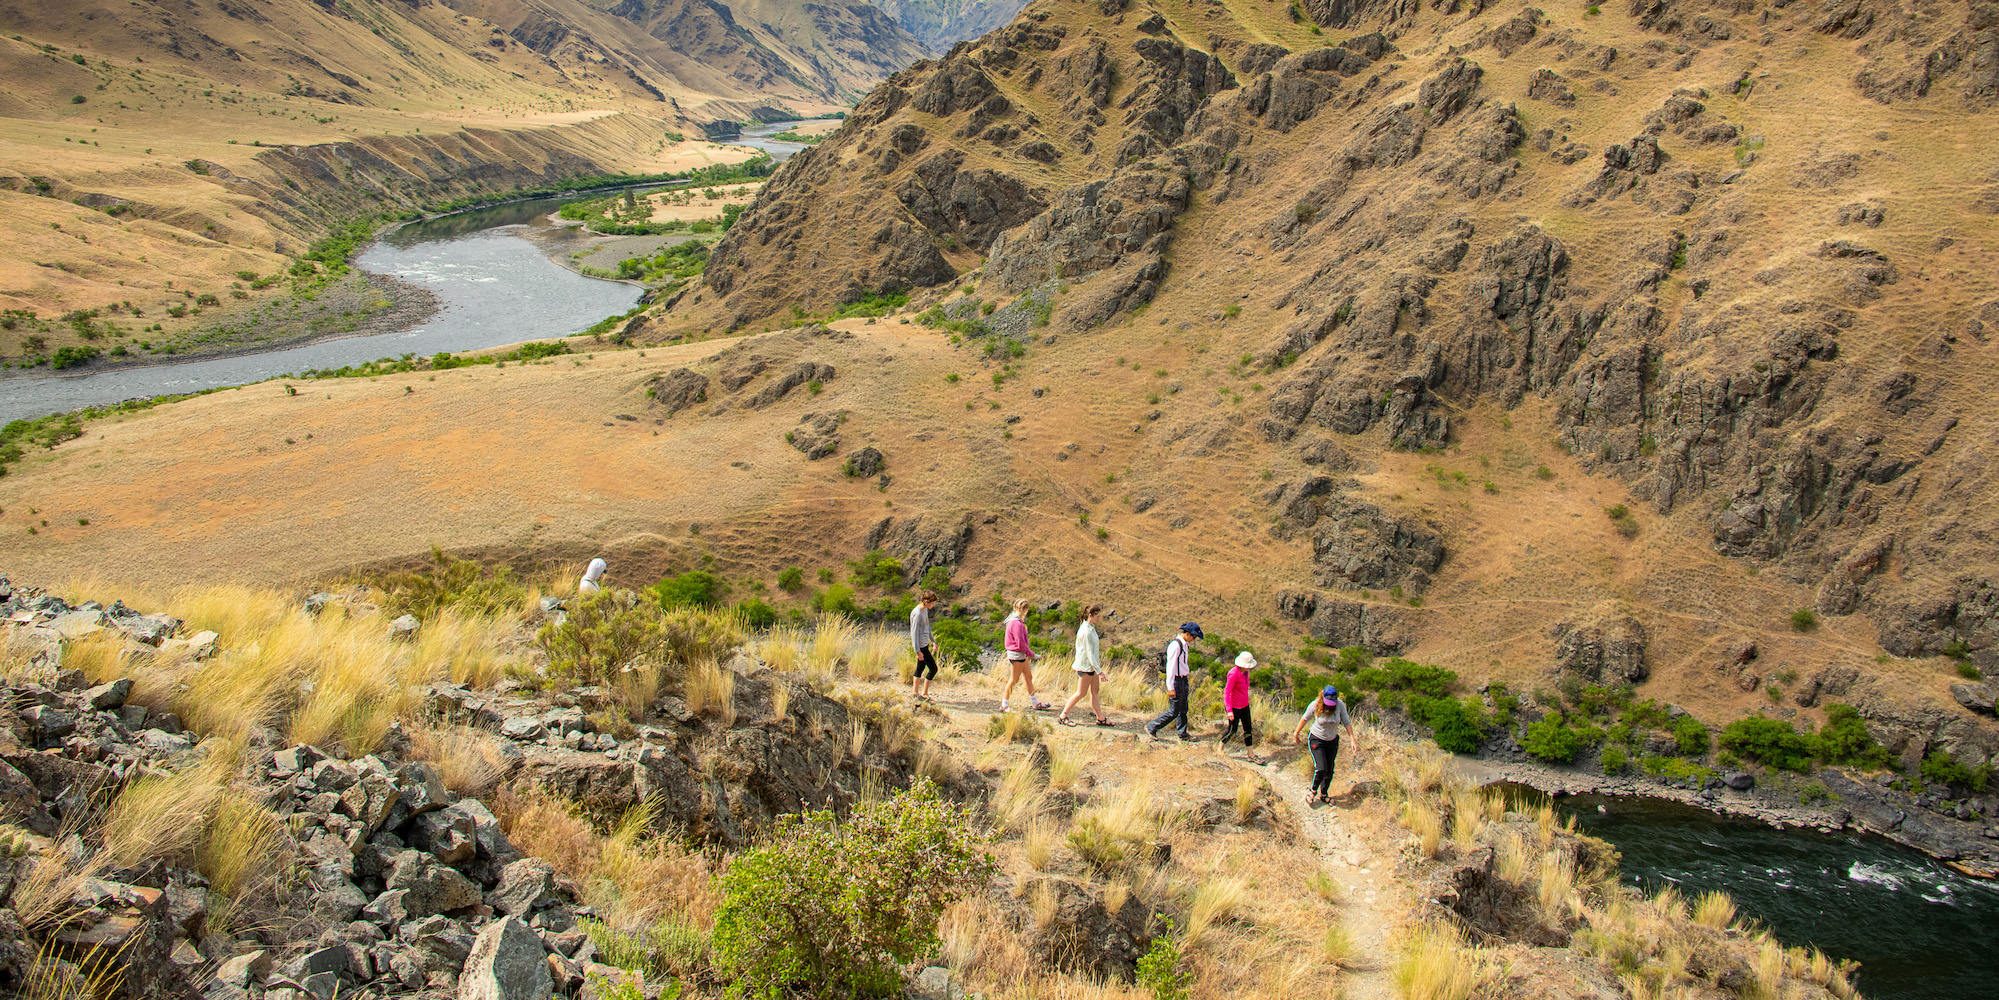 A group of people hiking along the Idaho side of the Snake River through Hells Canyon